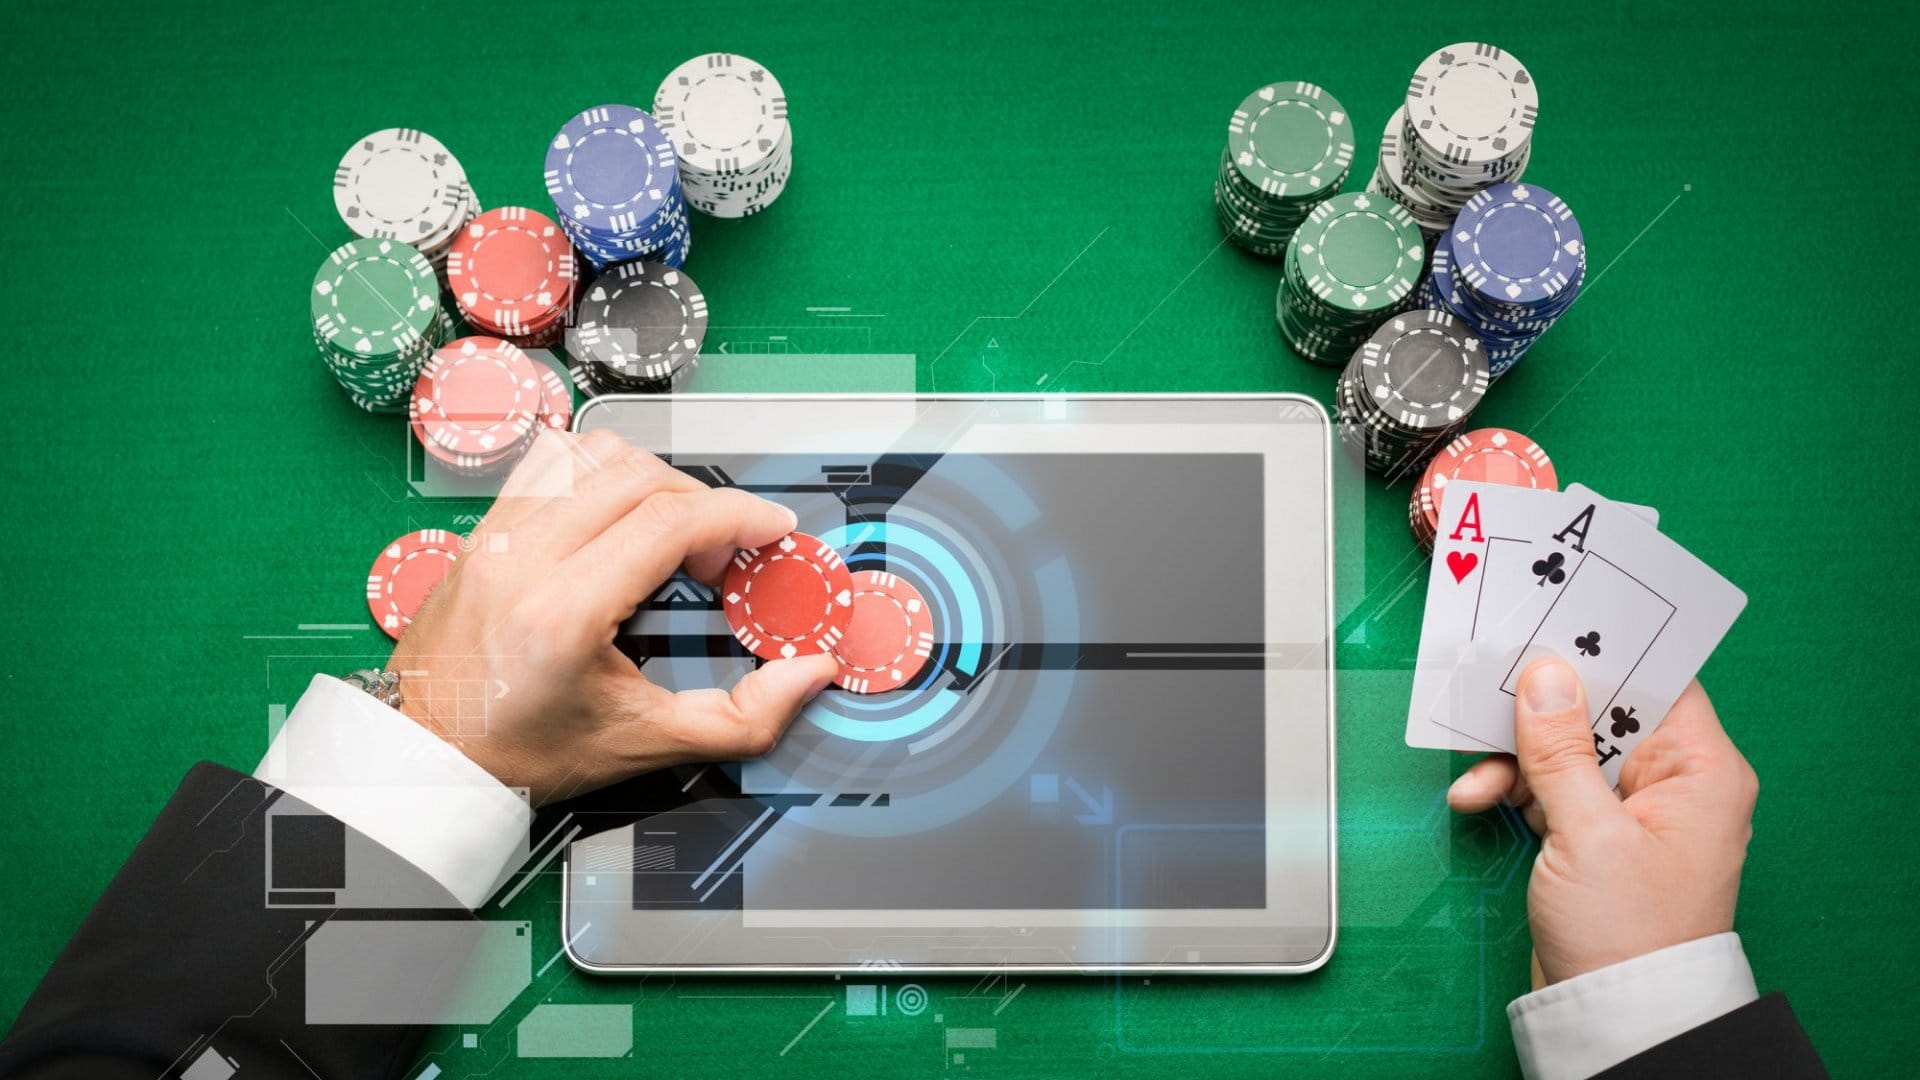 How Can You Check If Your Online Casino Is Safe?